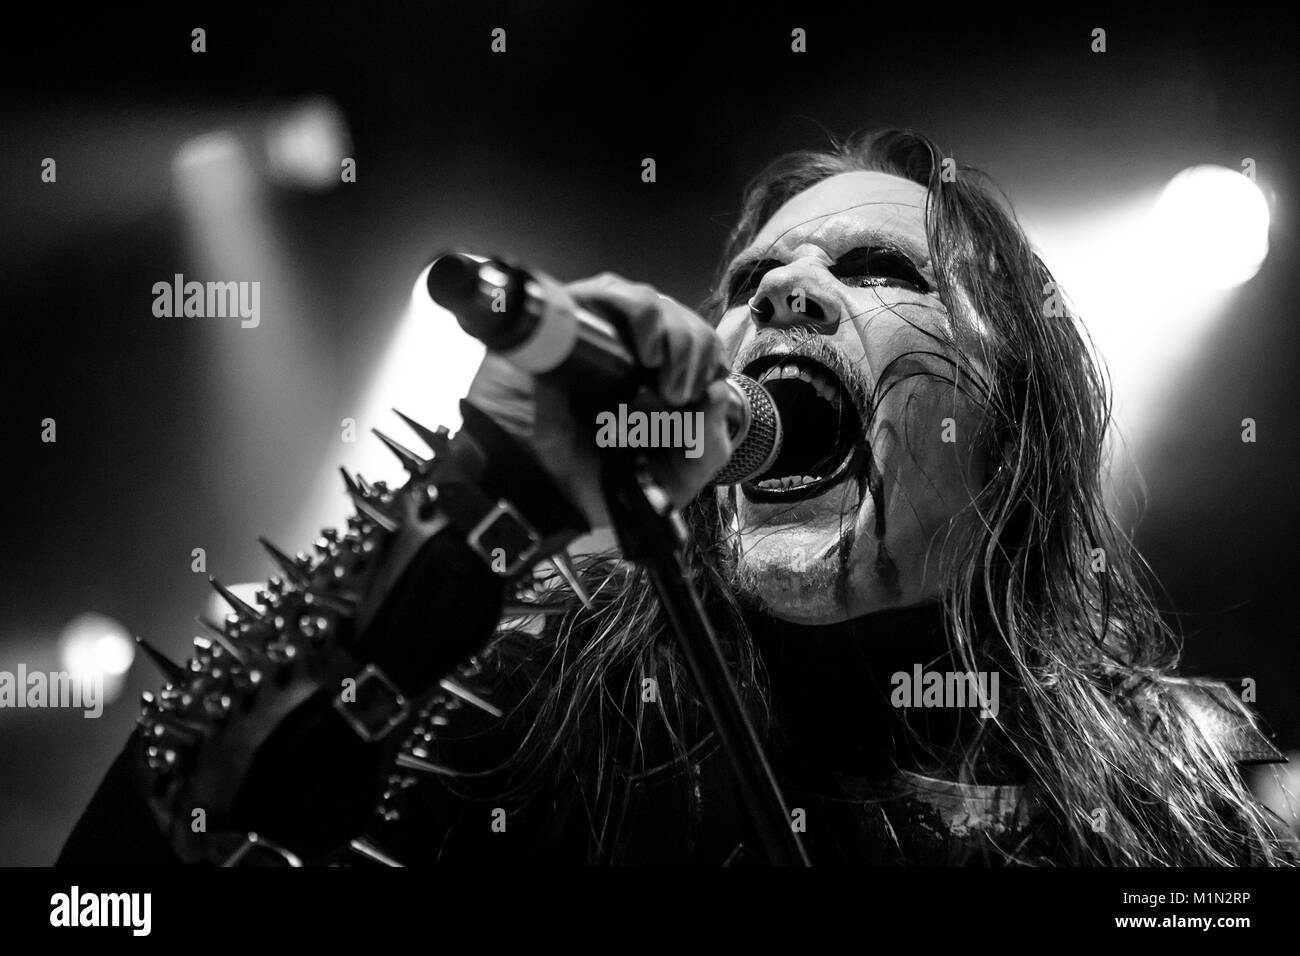 The Swedish black metal band Dark Funeral performs a live concert at the Norwegian heavy metal festival Blastfest 2015 in Bergen. Here vocalist Heljamadr is seen live on stage. Norway, 20/02 2015. Stock Photo